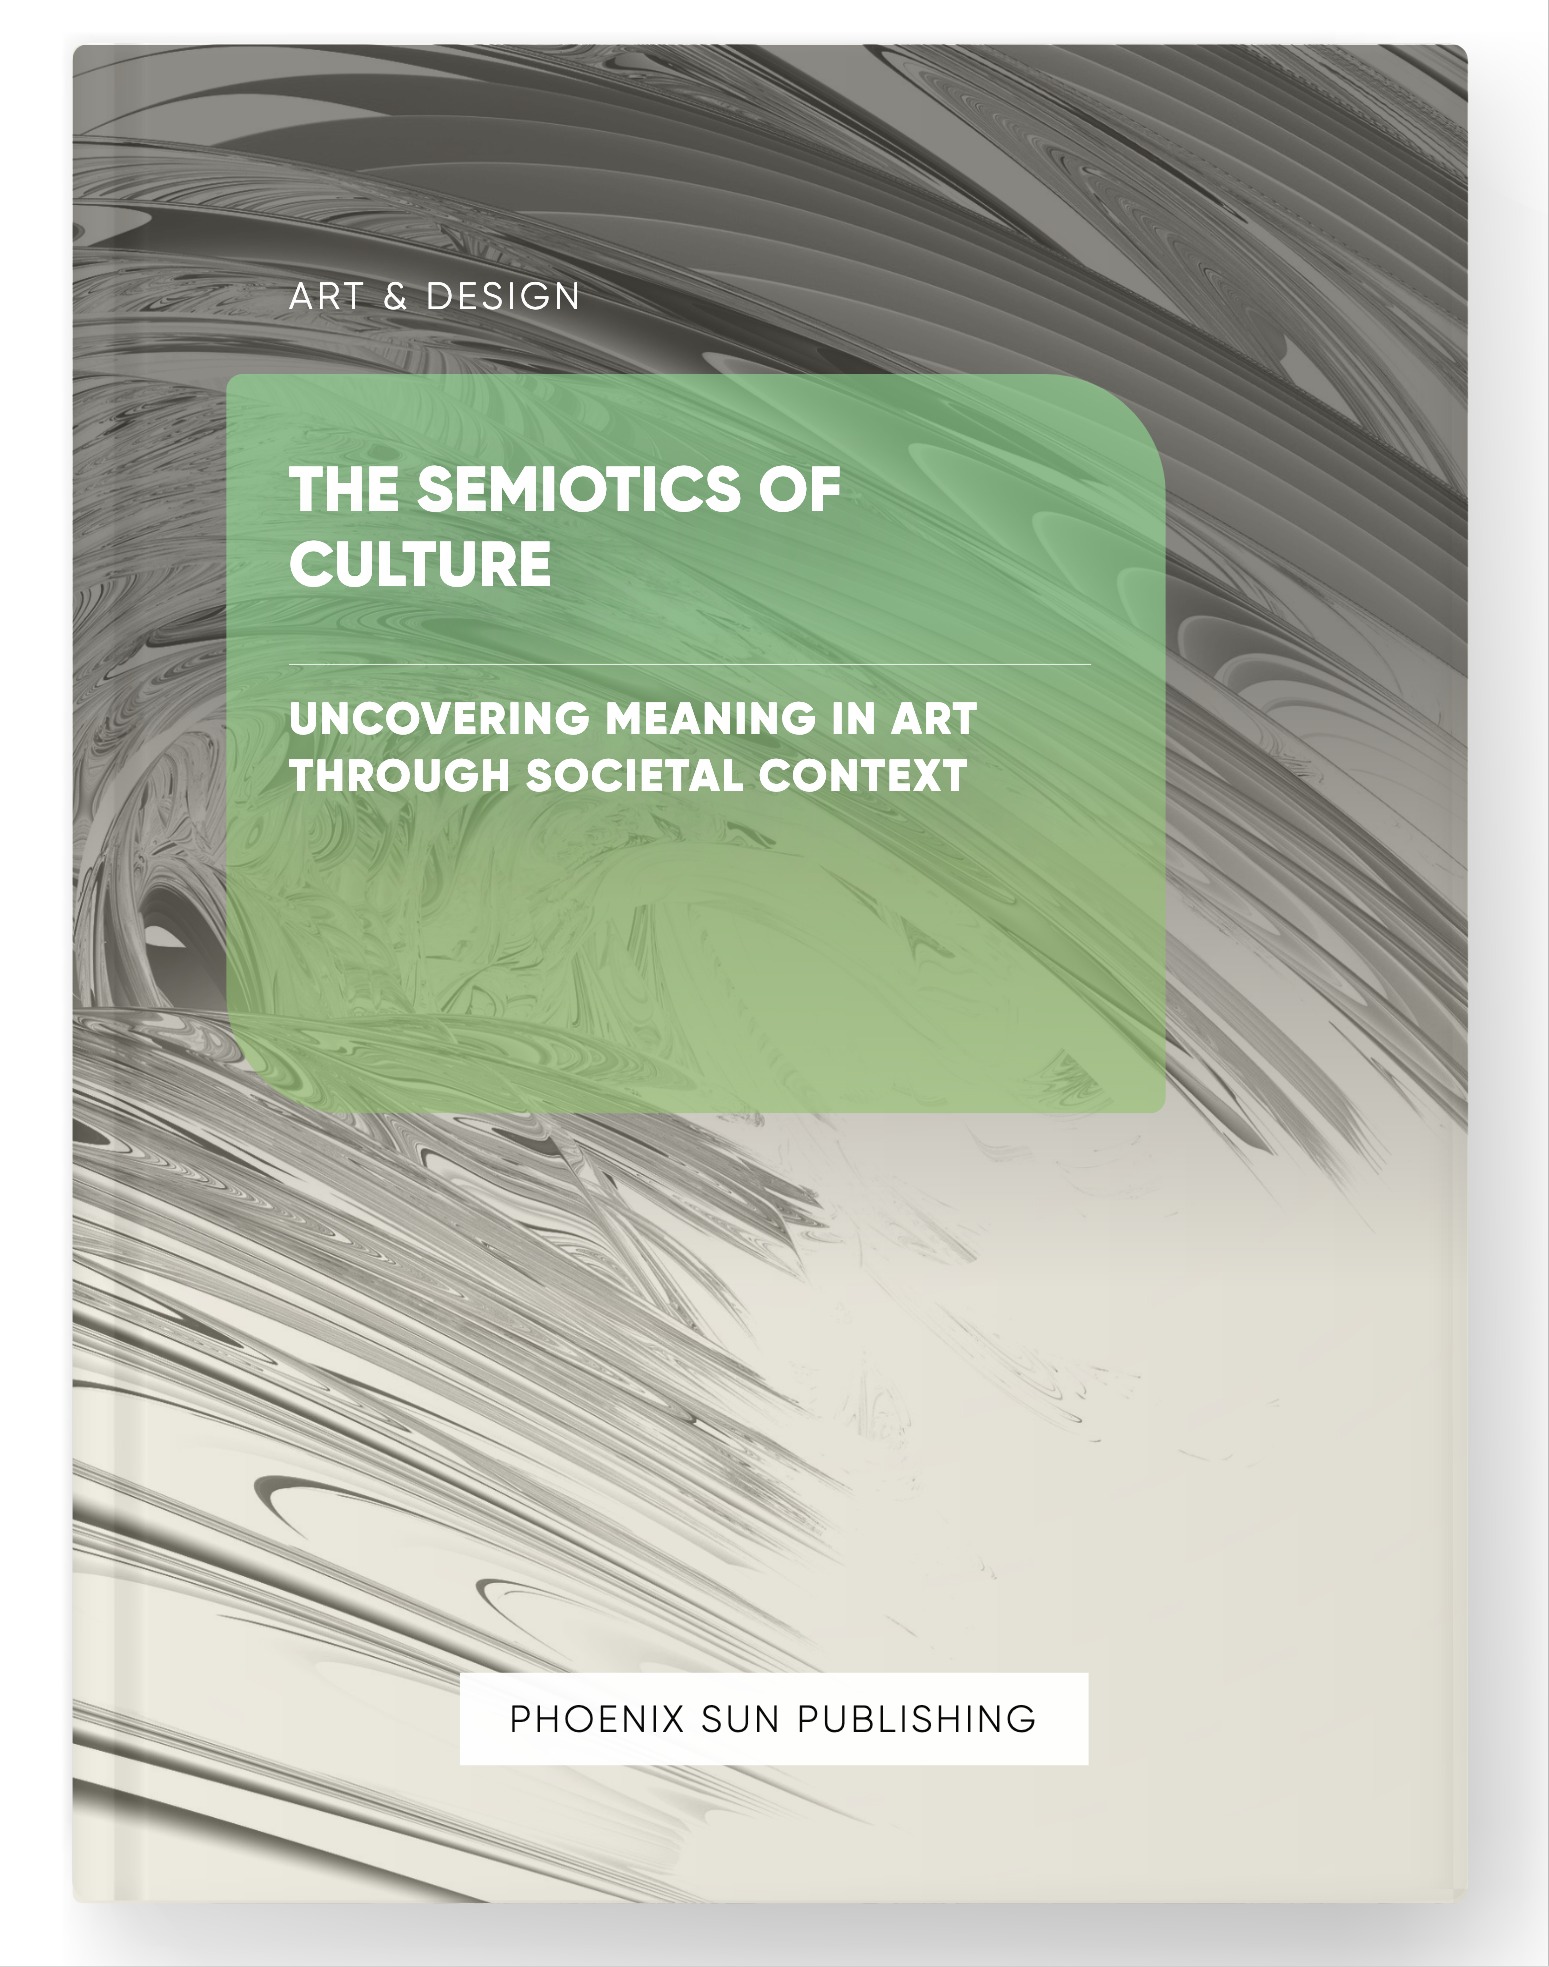 The Semiotics of Culture – Uncovering Meaning in Art through Societal Context